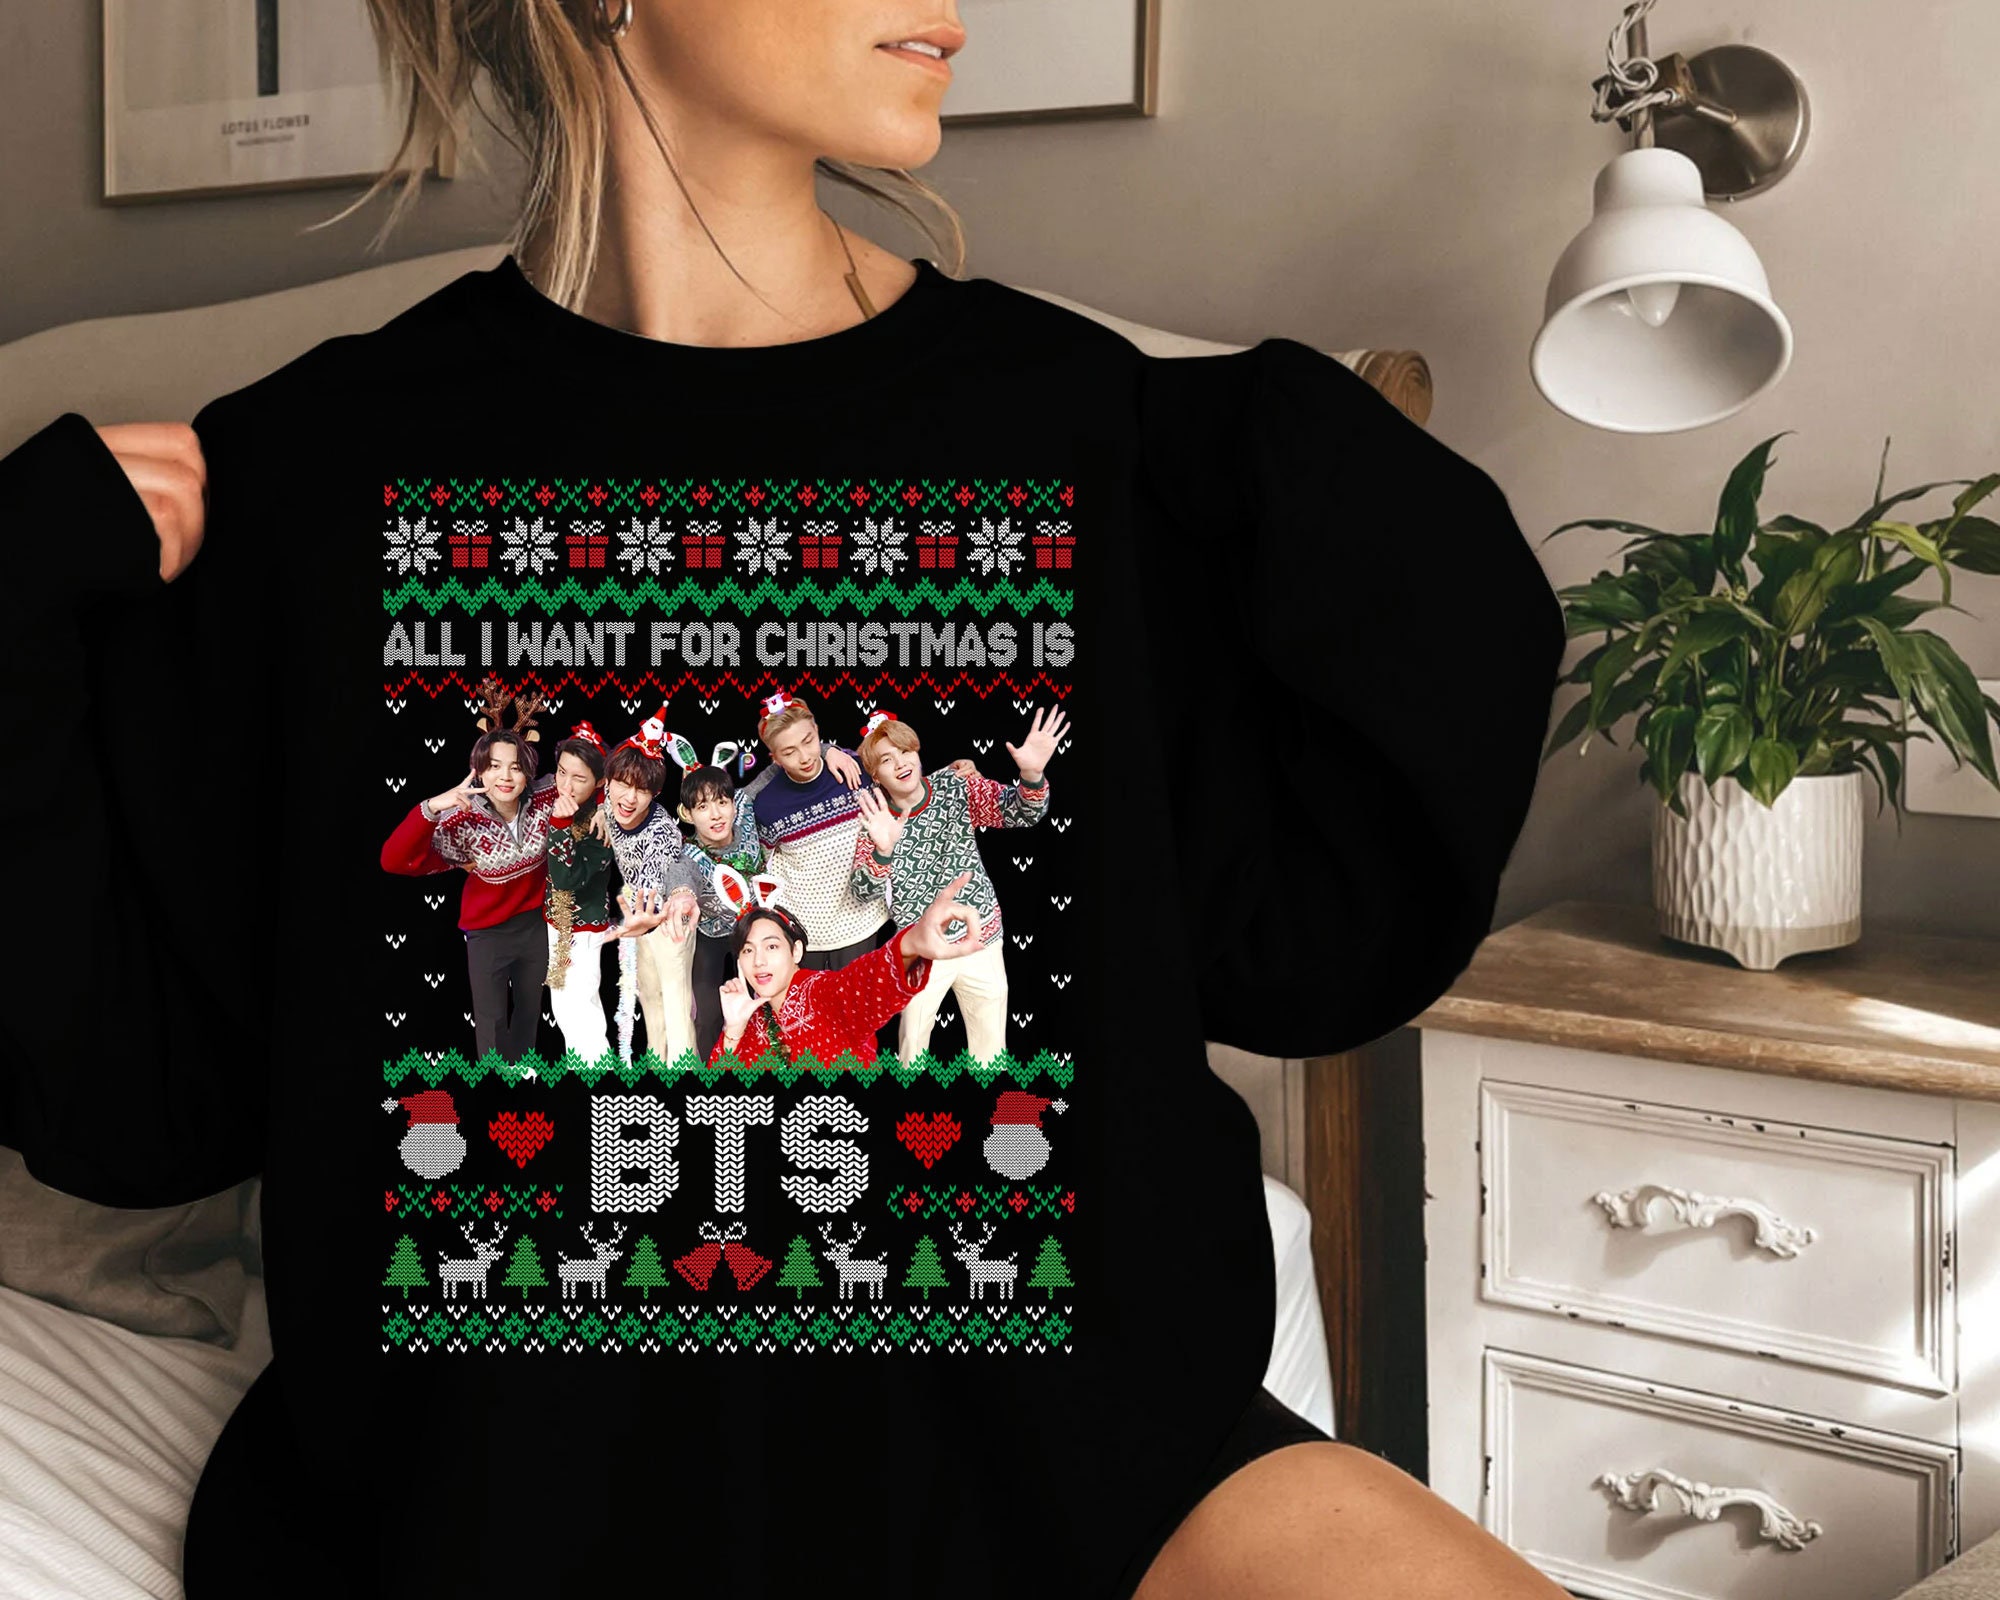 Discover BTS Ugly Christmas Sweatshirt, All I Want For Christmas Is BTS